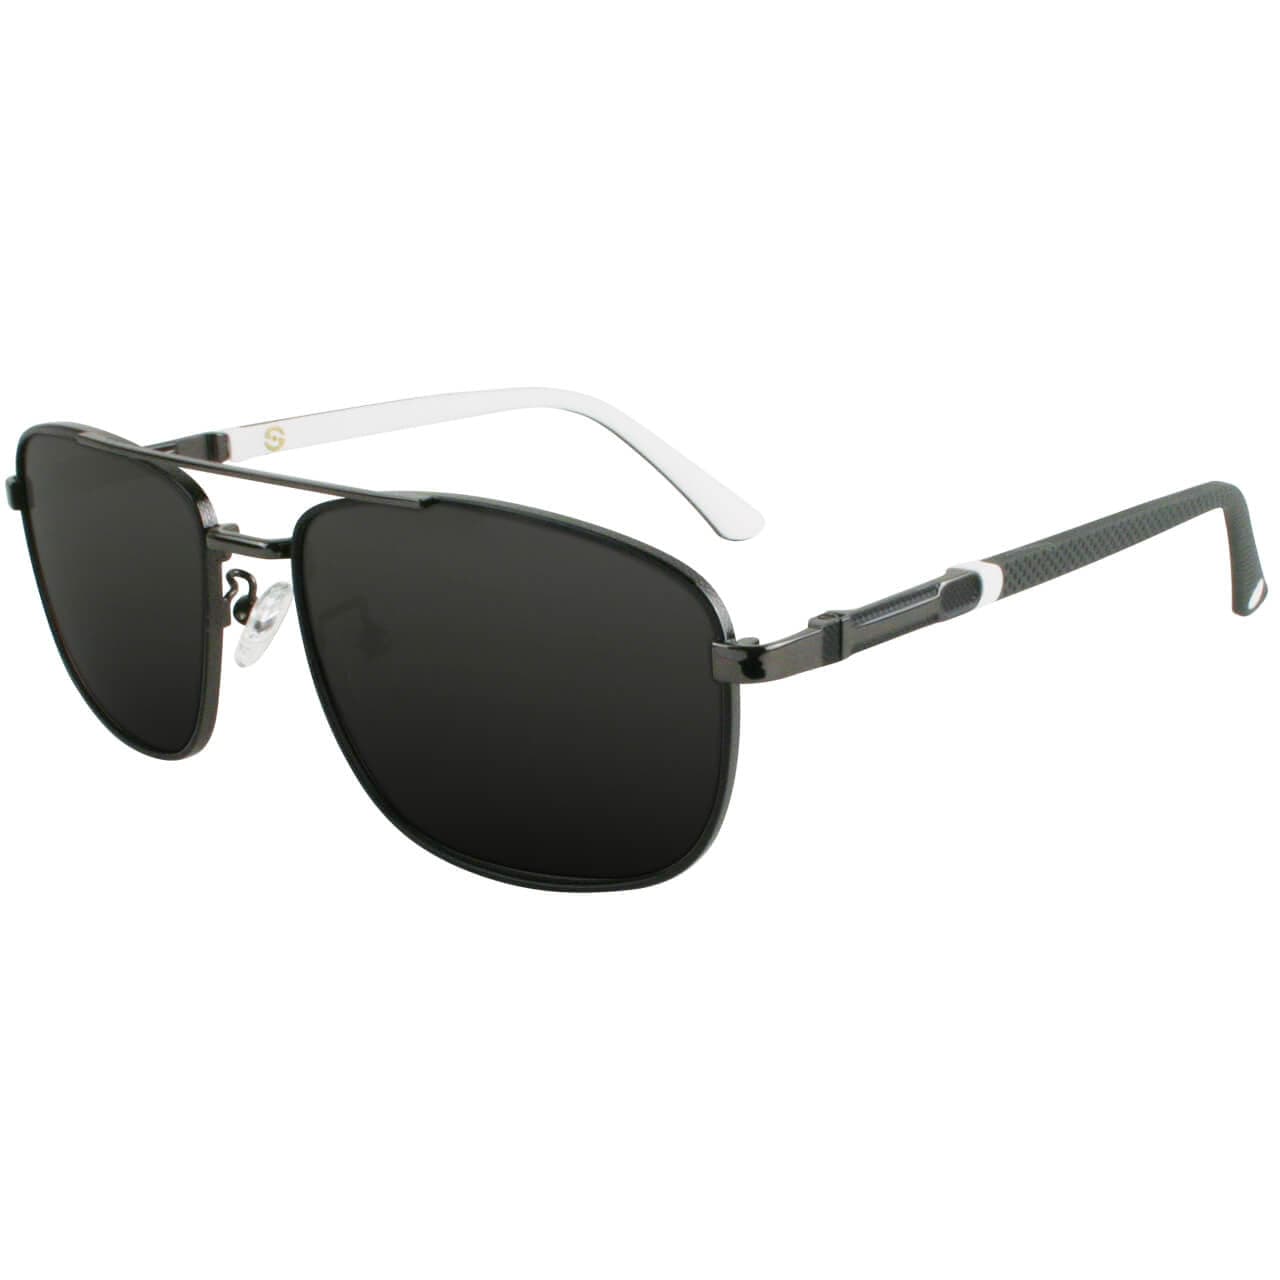 Solect Density Aviator Sunglasses with Gray Polarized Lenses